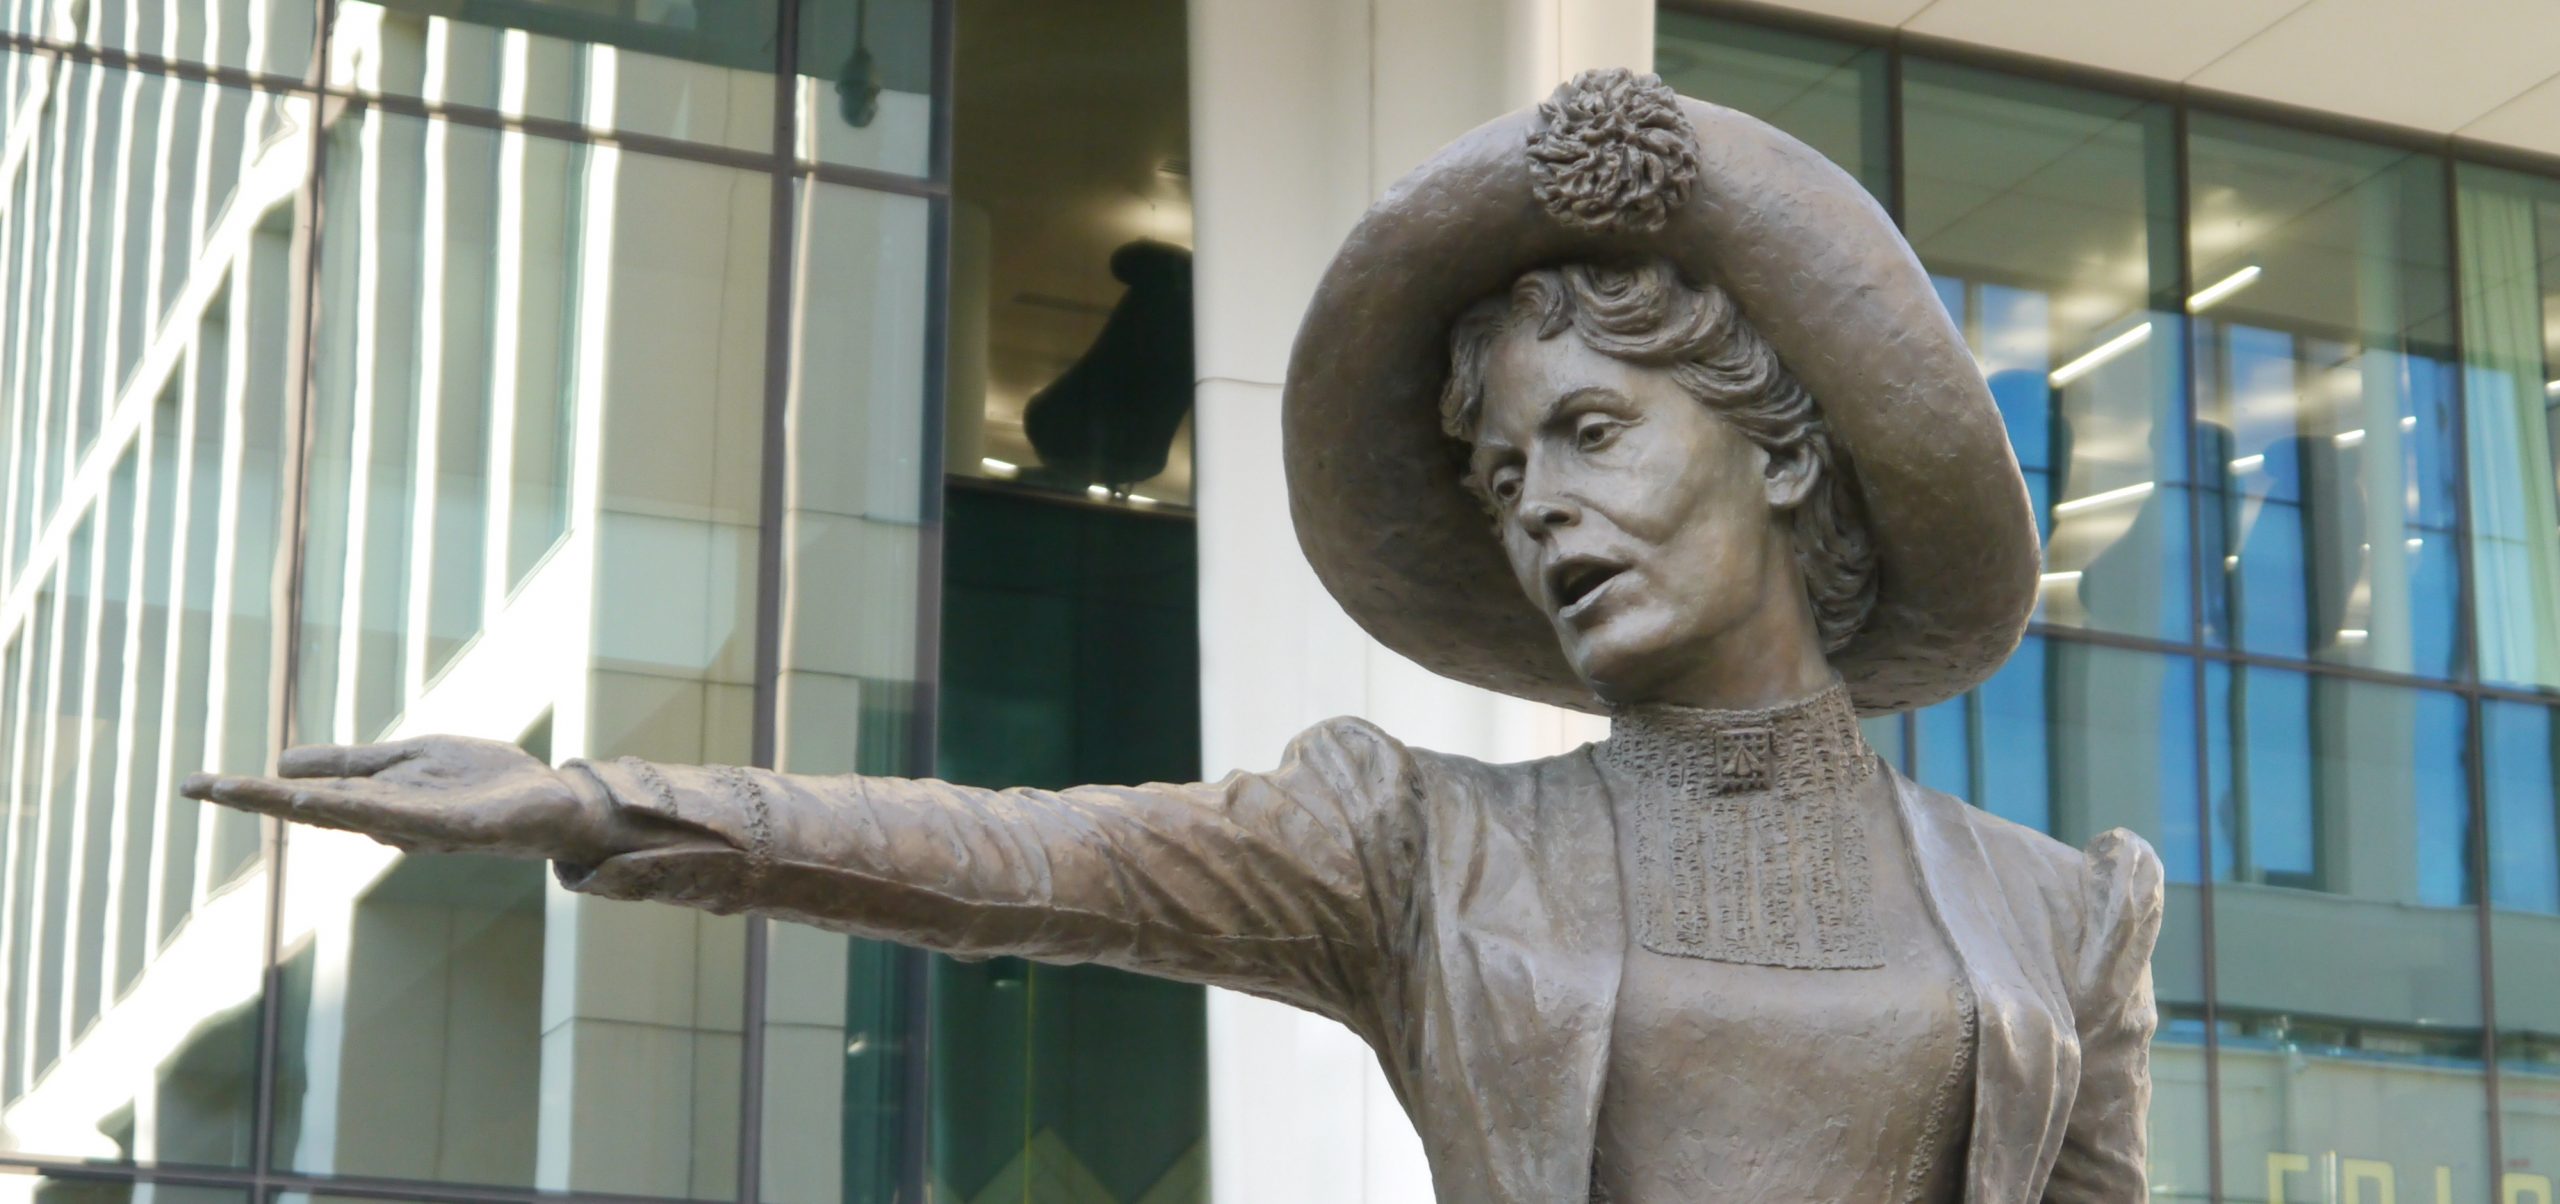 Photo show image of the Emmeline Pankhurst statue, with her arm oustretched to urge women to demand the vote